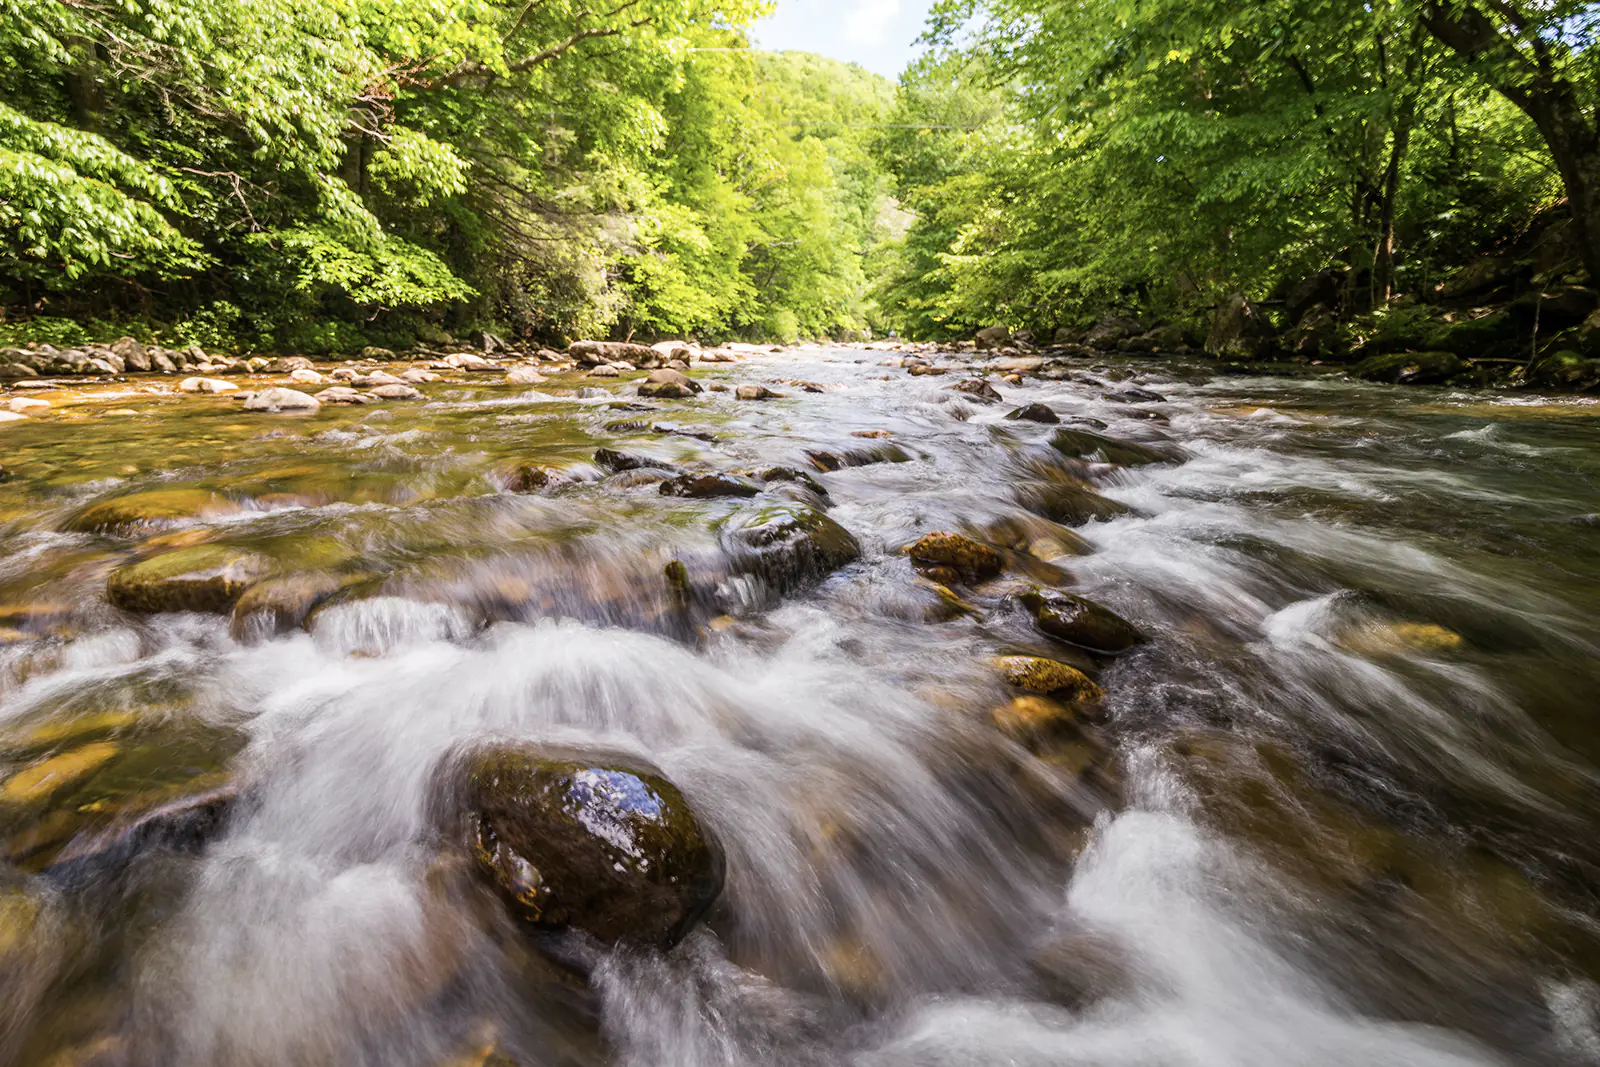 Beautiful landscape of a rushing Hazel Creek surrounded by green foilage.